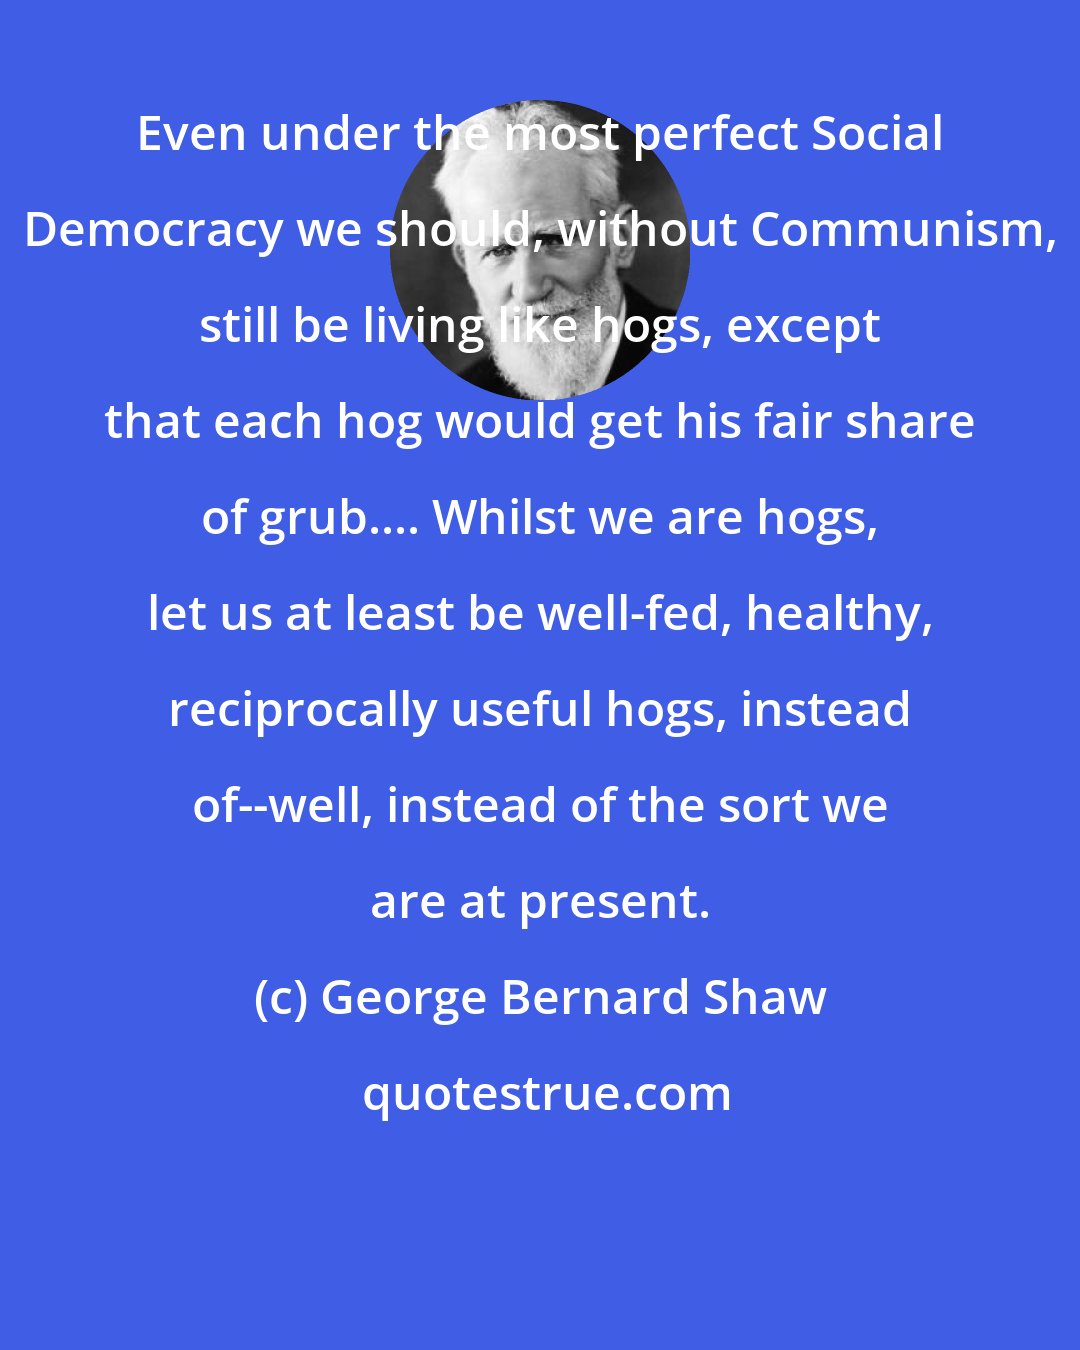 George Bernard Shaw: Even under the most perfect Social Democracy we should, without Communism, still be living like hogs, except that each hog would get his fair share of grub.... Whilst we are hogs, let us at least be well-fed, healthy, reciprocally useful hogs, instead of--well, instead of the sort we are at present.